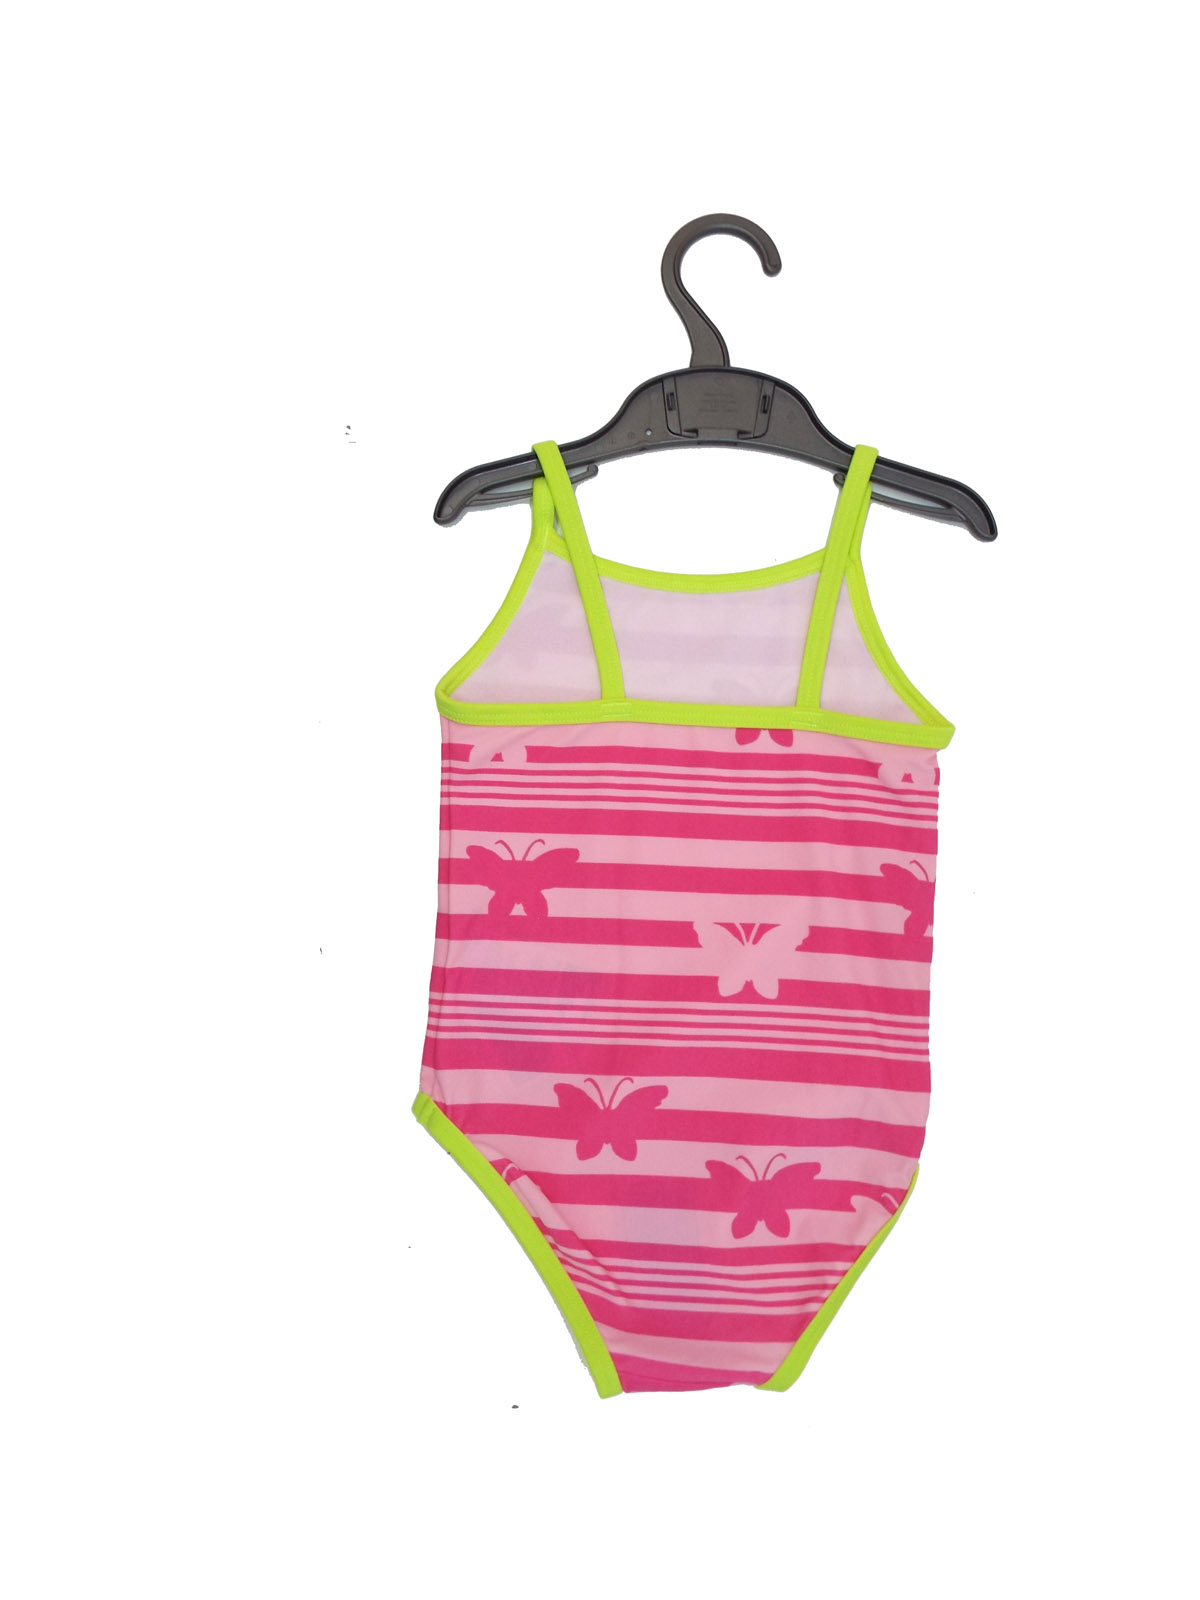 Wholesale Mothercare clothing and lingerie - - M0thercare PINK Girls ...